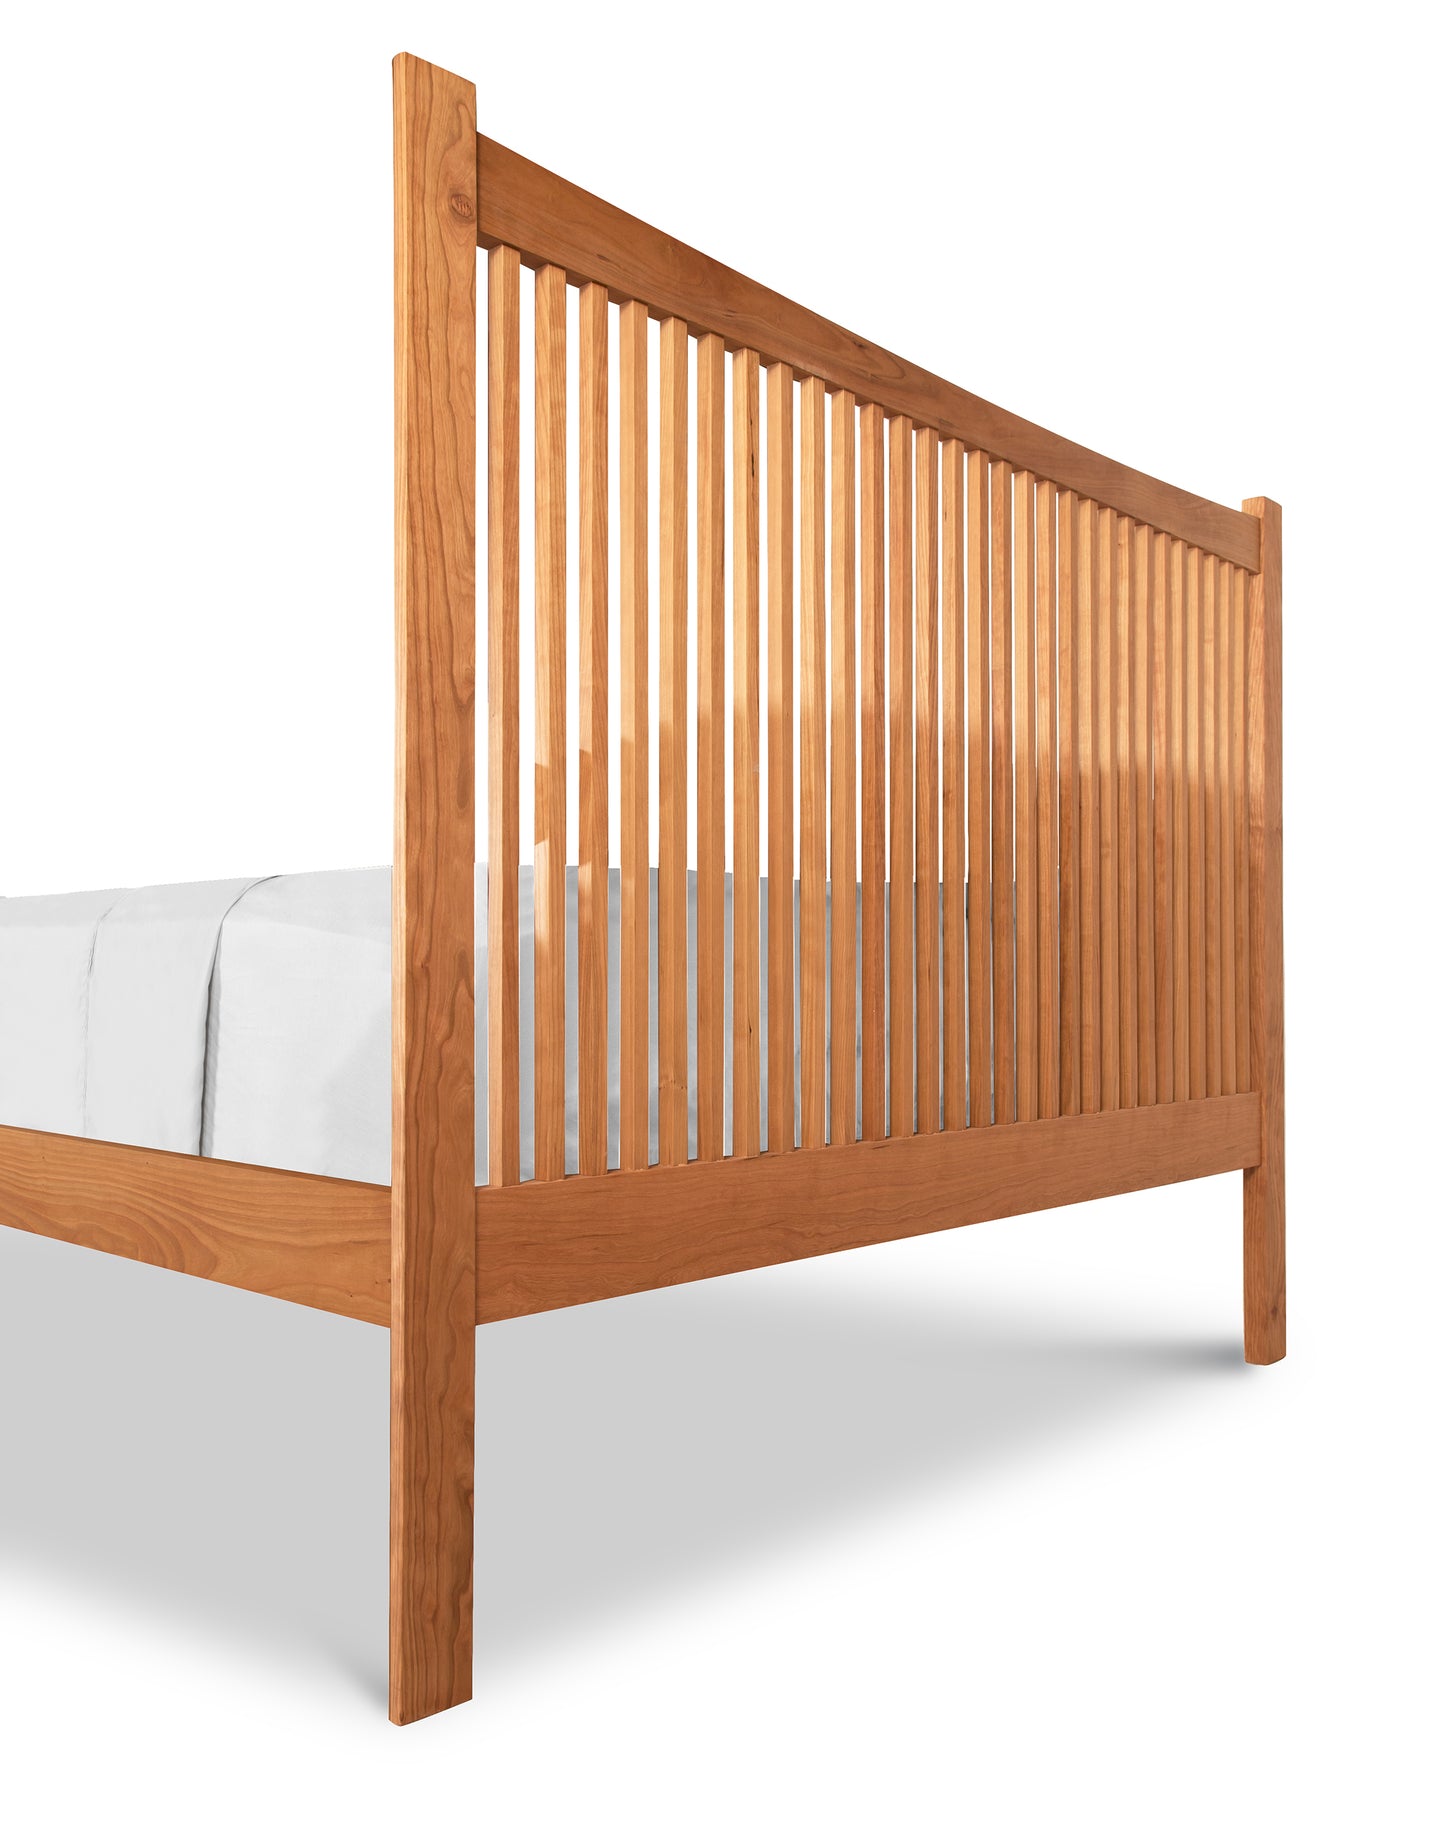 A Heartwood Shaker Low Footboard Bed by Vermont Furniture Designs with vertical slats, showcasing a simple and traditional Arts and Crafts styling, isolated on a white background with bedding partially visible.